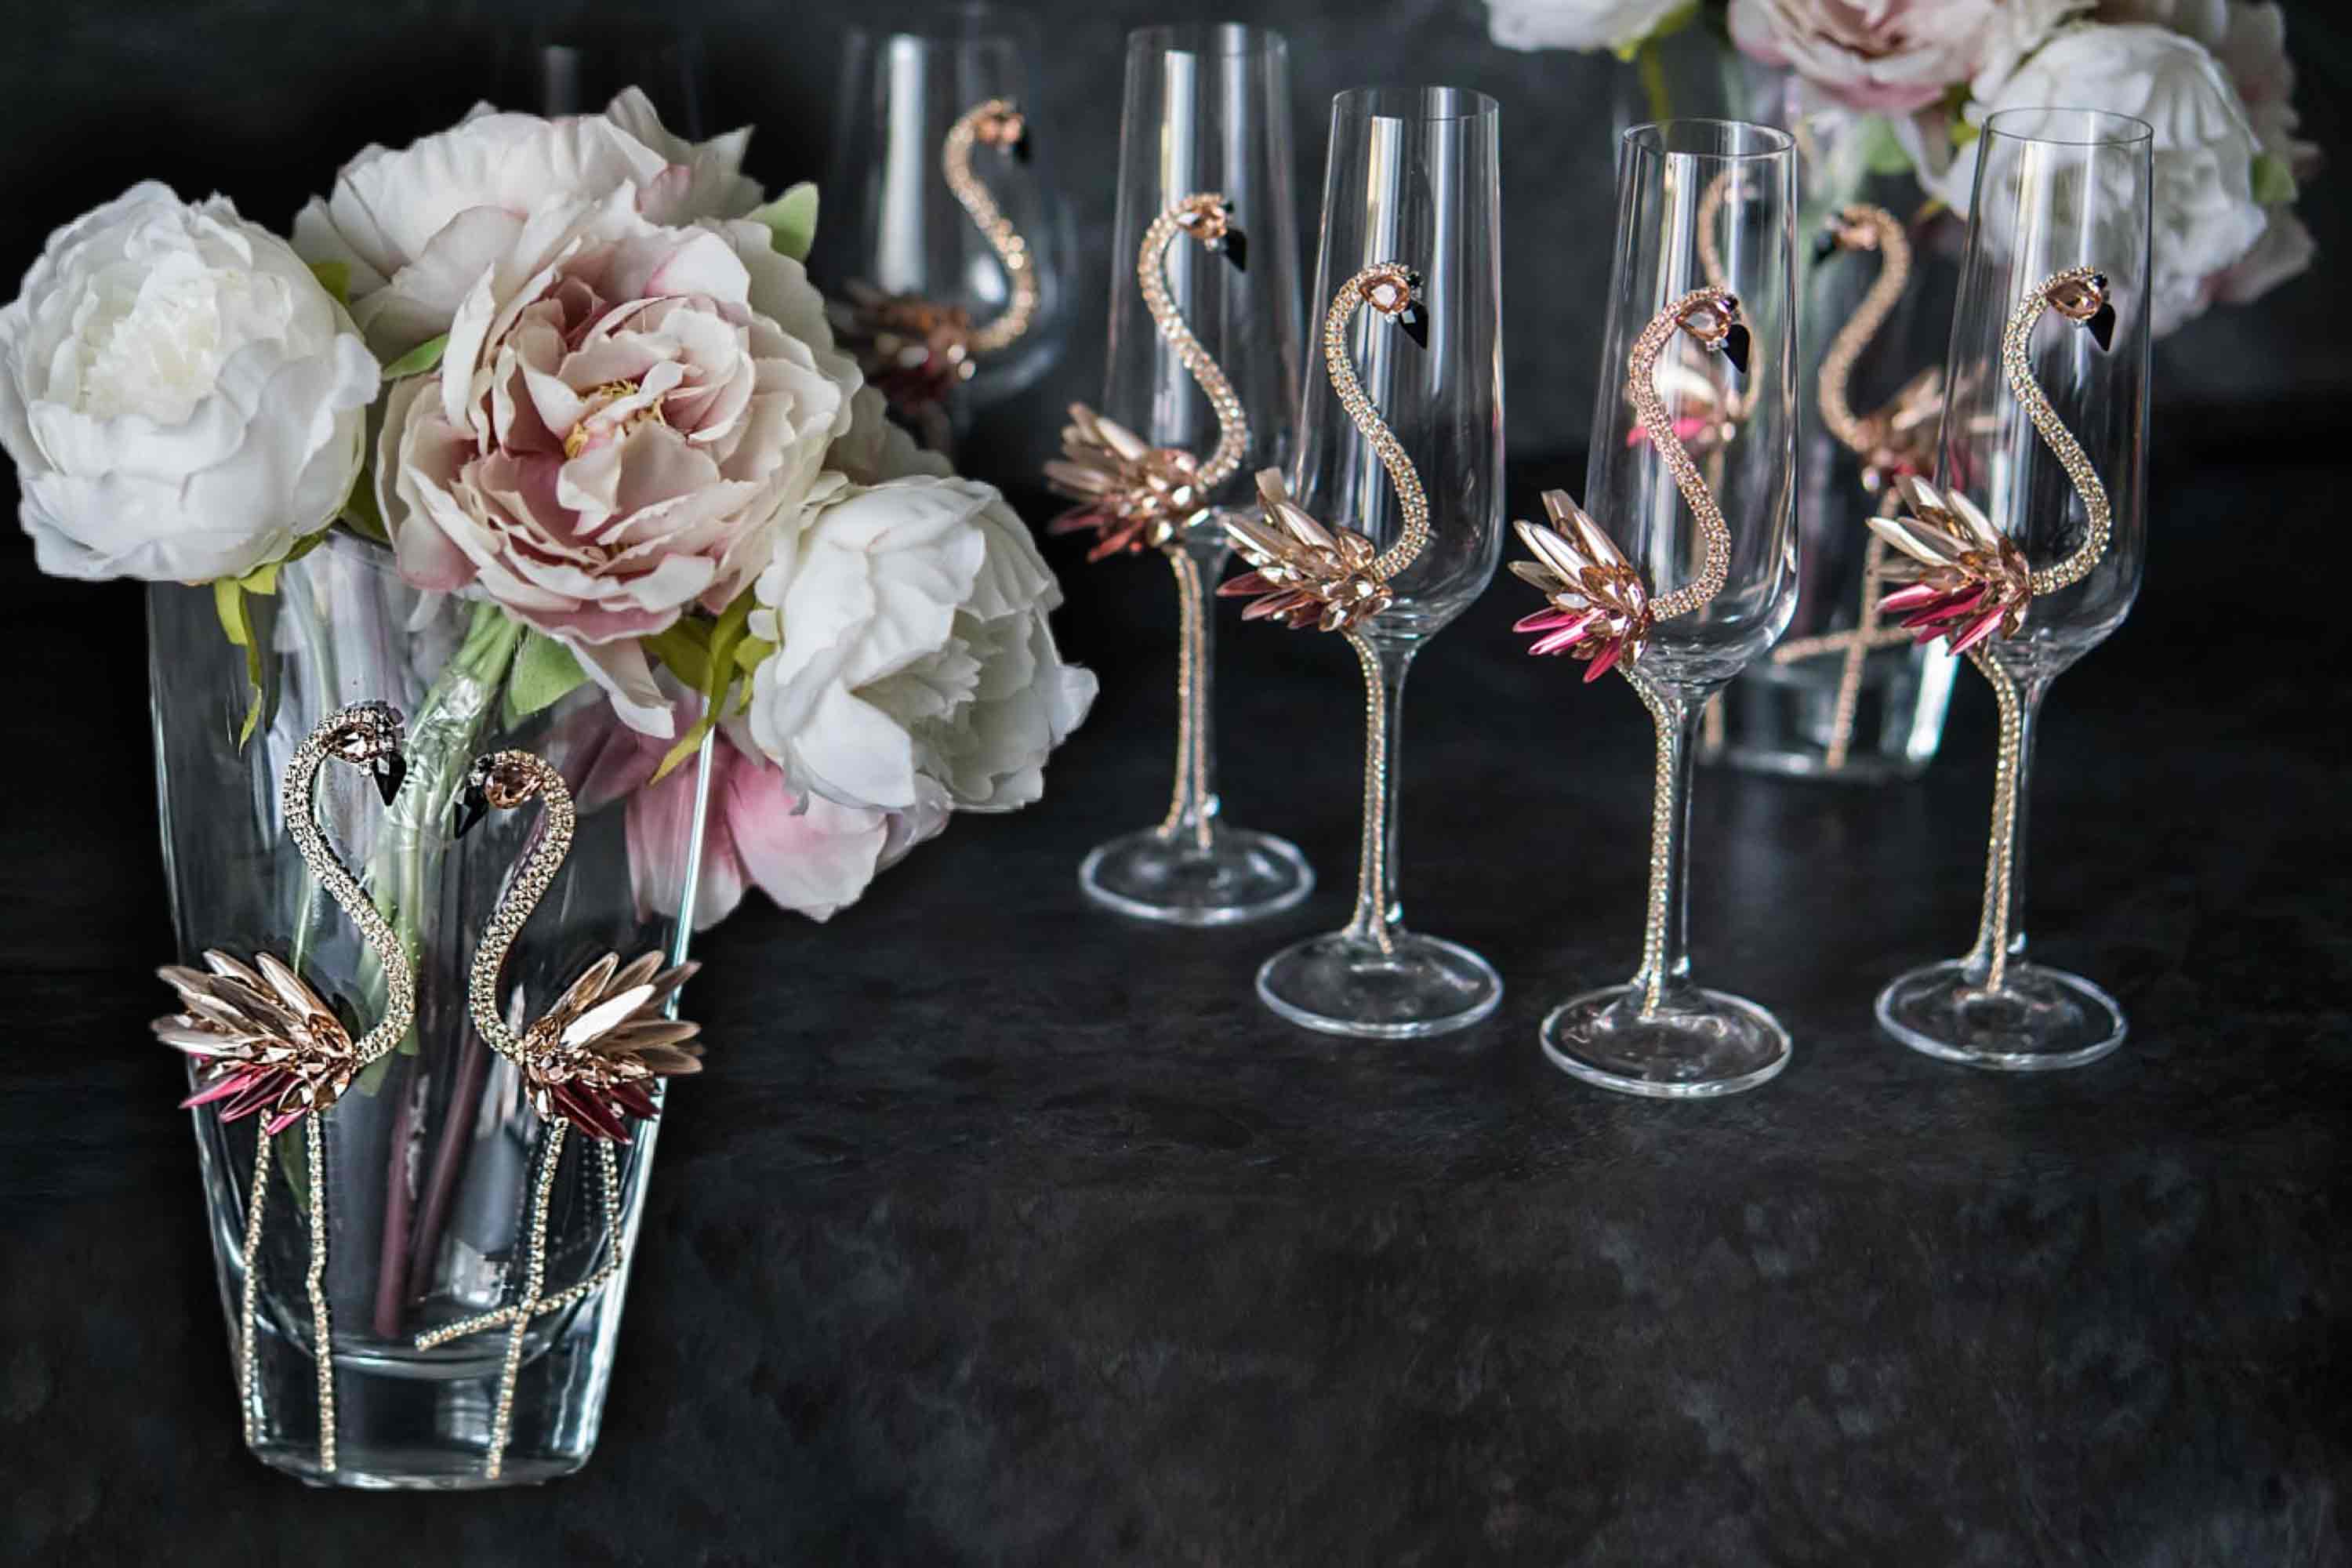 Explore our unique glassware and gifts, featuring everything from engraved flamingo wine glasses to crystal dragon champagne sets, perfect for personal use or as thoughtful presents.